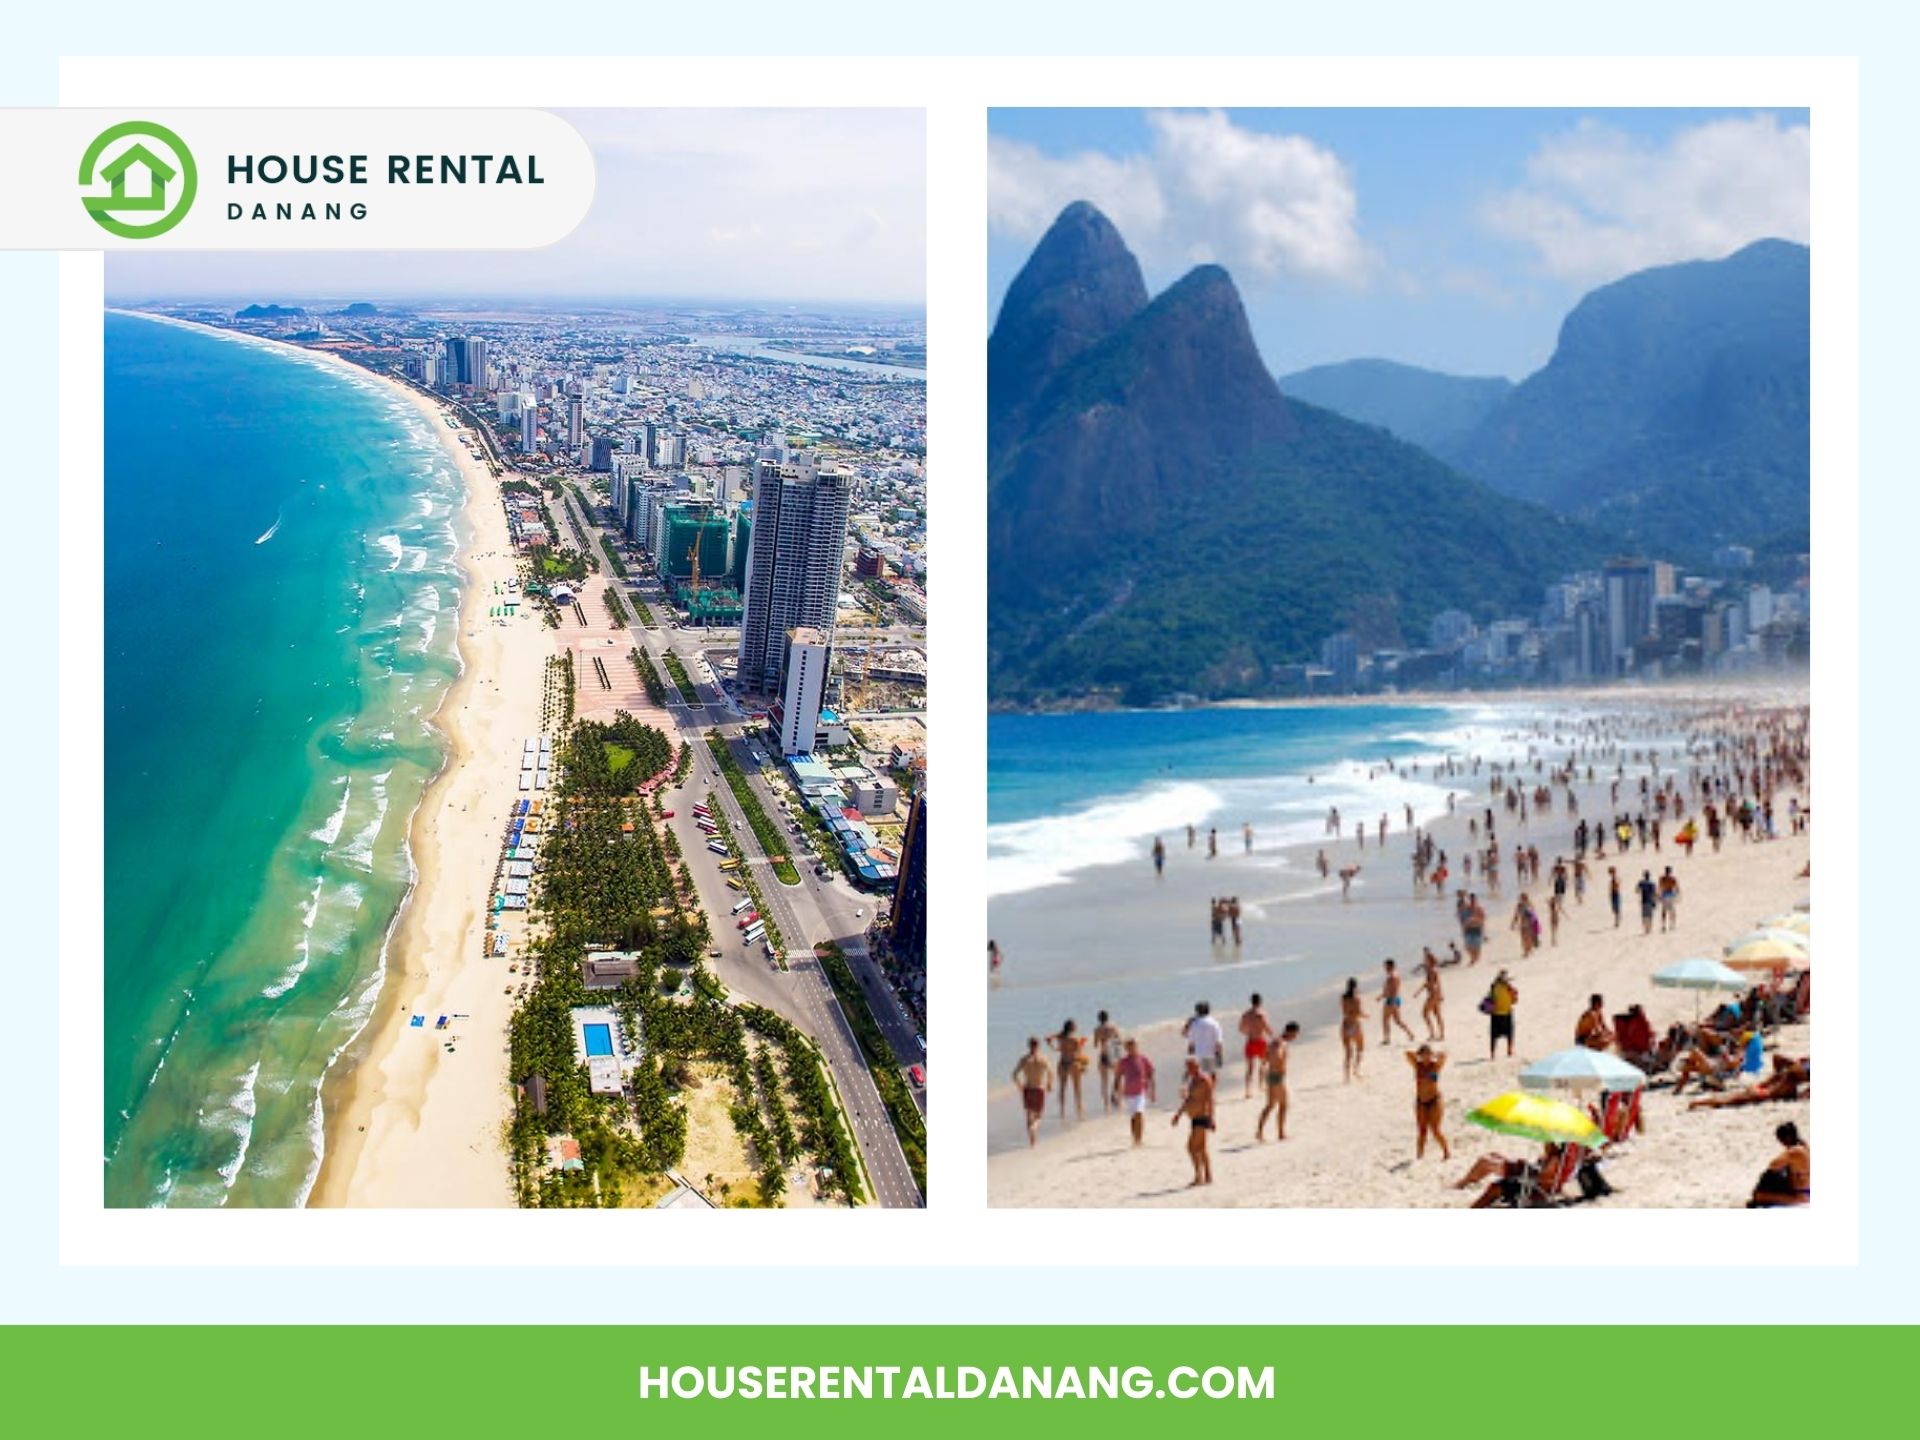 Side-by-side images of a city beach with high-rise buildings on the left and a crowded beach with mountains in the background on the right, promoting House Rental Danang—the ideal choice for experiencing the best places to visit in Da Nang.